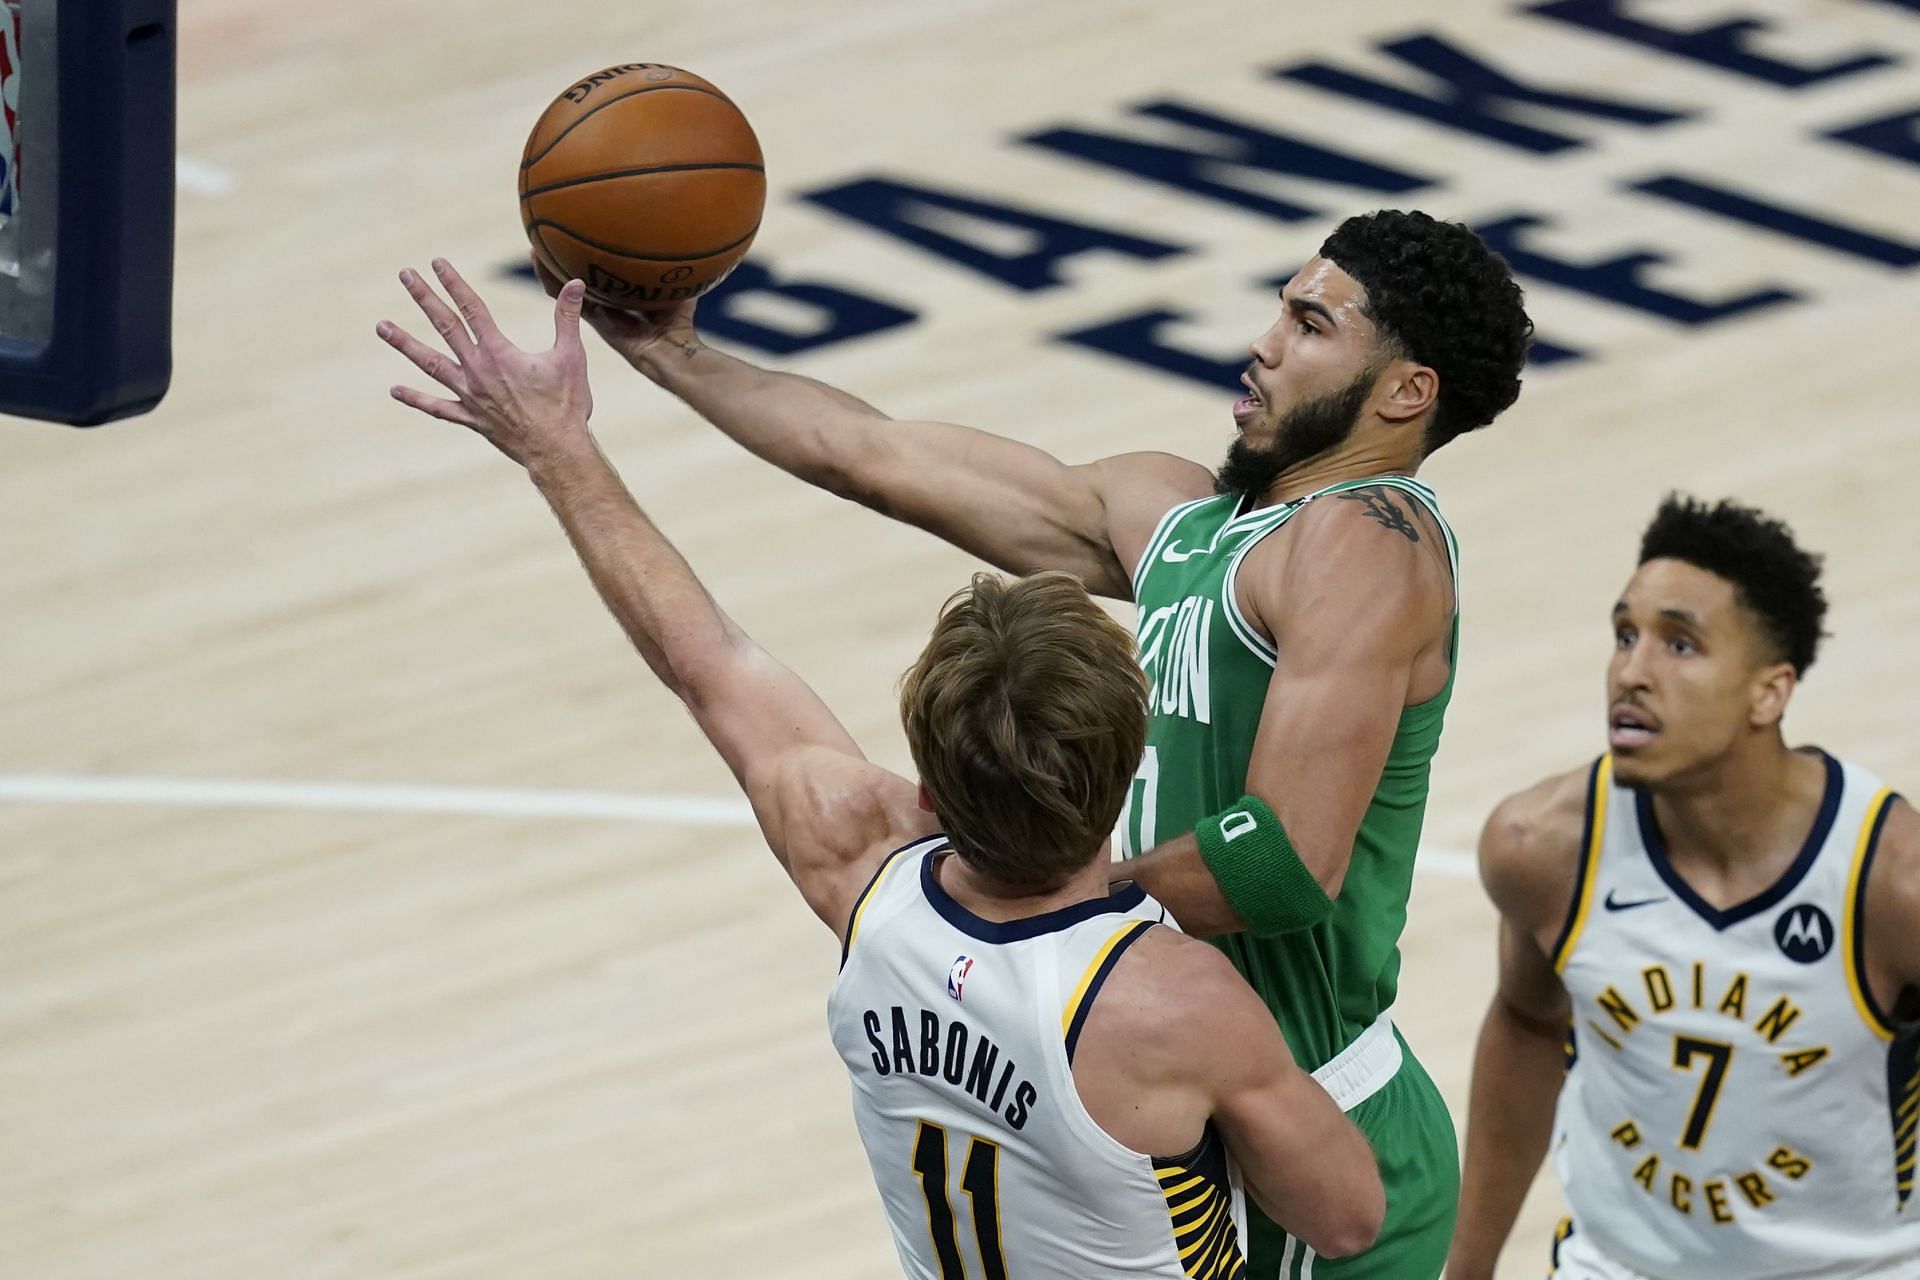 The visiting Indiana Pacers will meet the Boston Celtics in a two-game series. [Photo: MassLive.com]